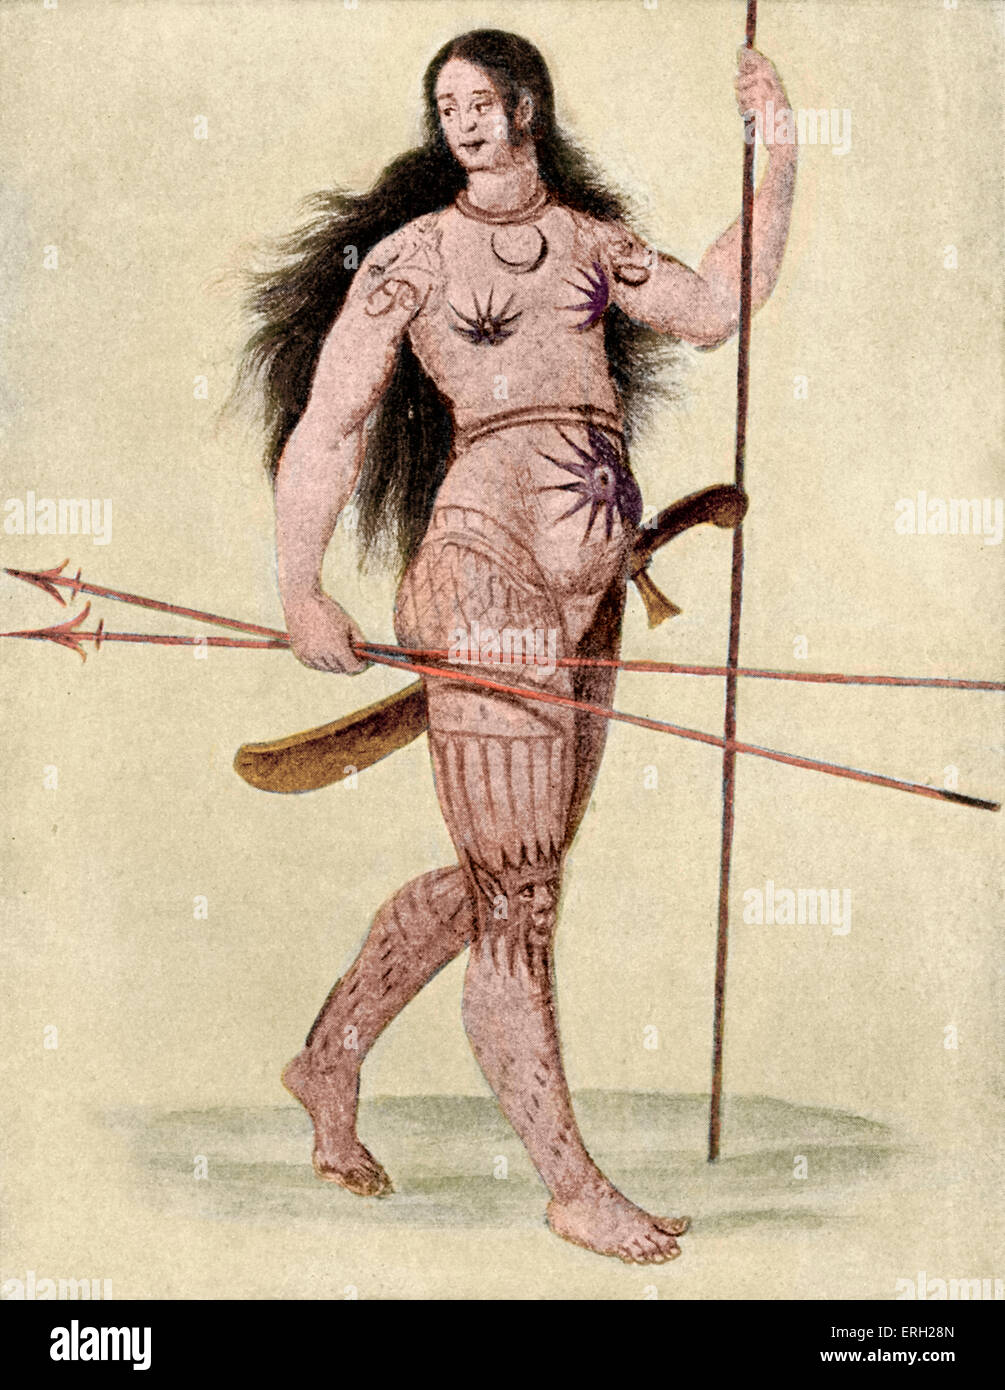 An illustration by John White from 'Voyage into Virginia' by Walter Raleigh.1585. The image depicts a Pict woman and was used to illustrate a comparison between ancient Britons and the Native peoples encountered in North America. WR: English writer, poet, courtier and explorer, c 1552 – 29 October 1618. Colourised version. Stock Photo